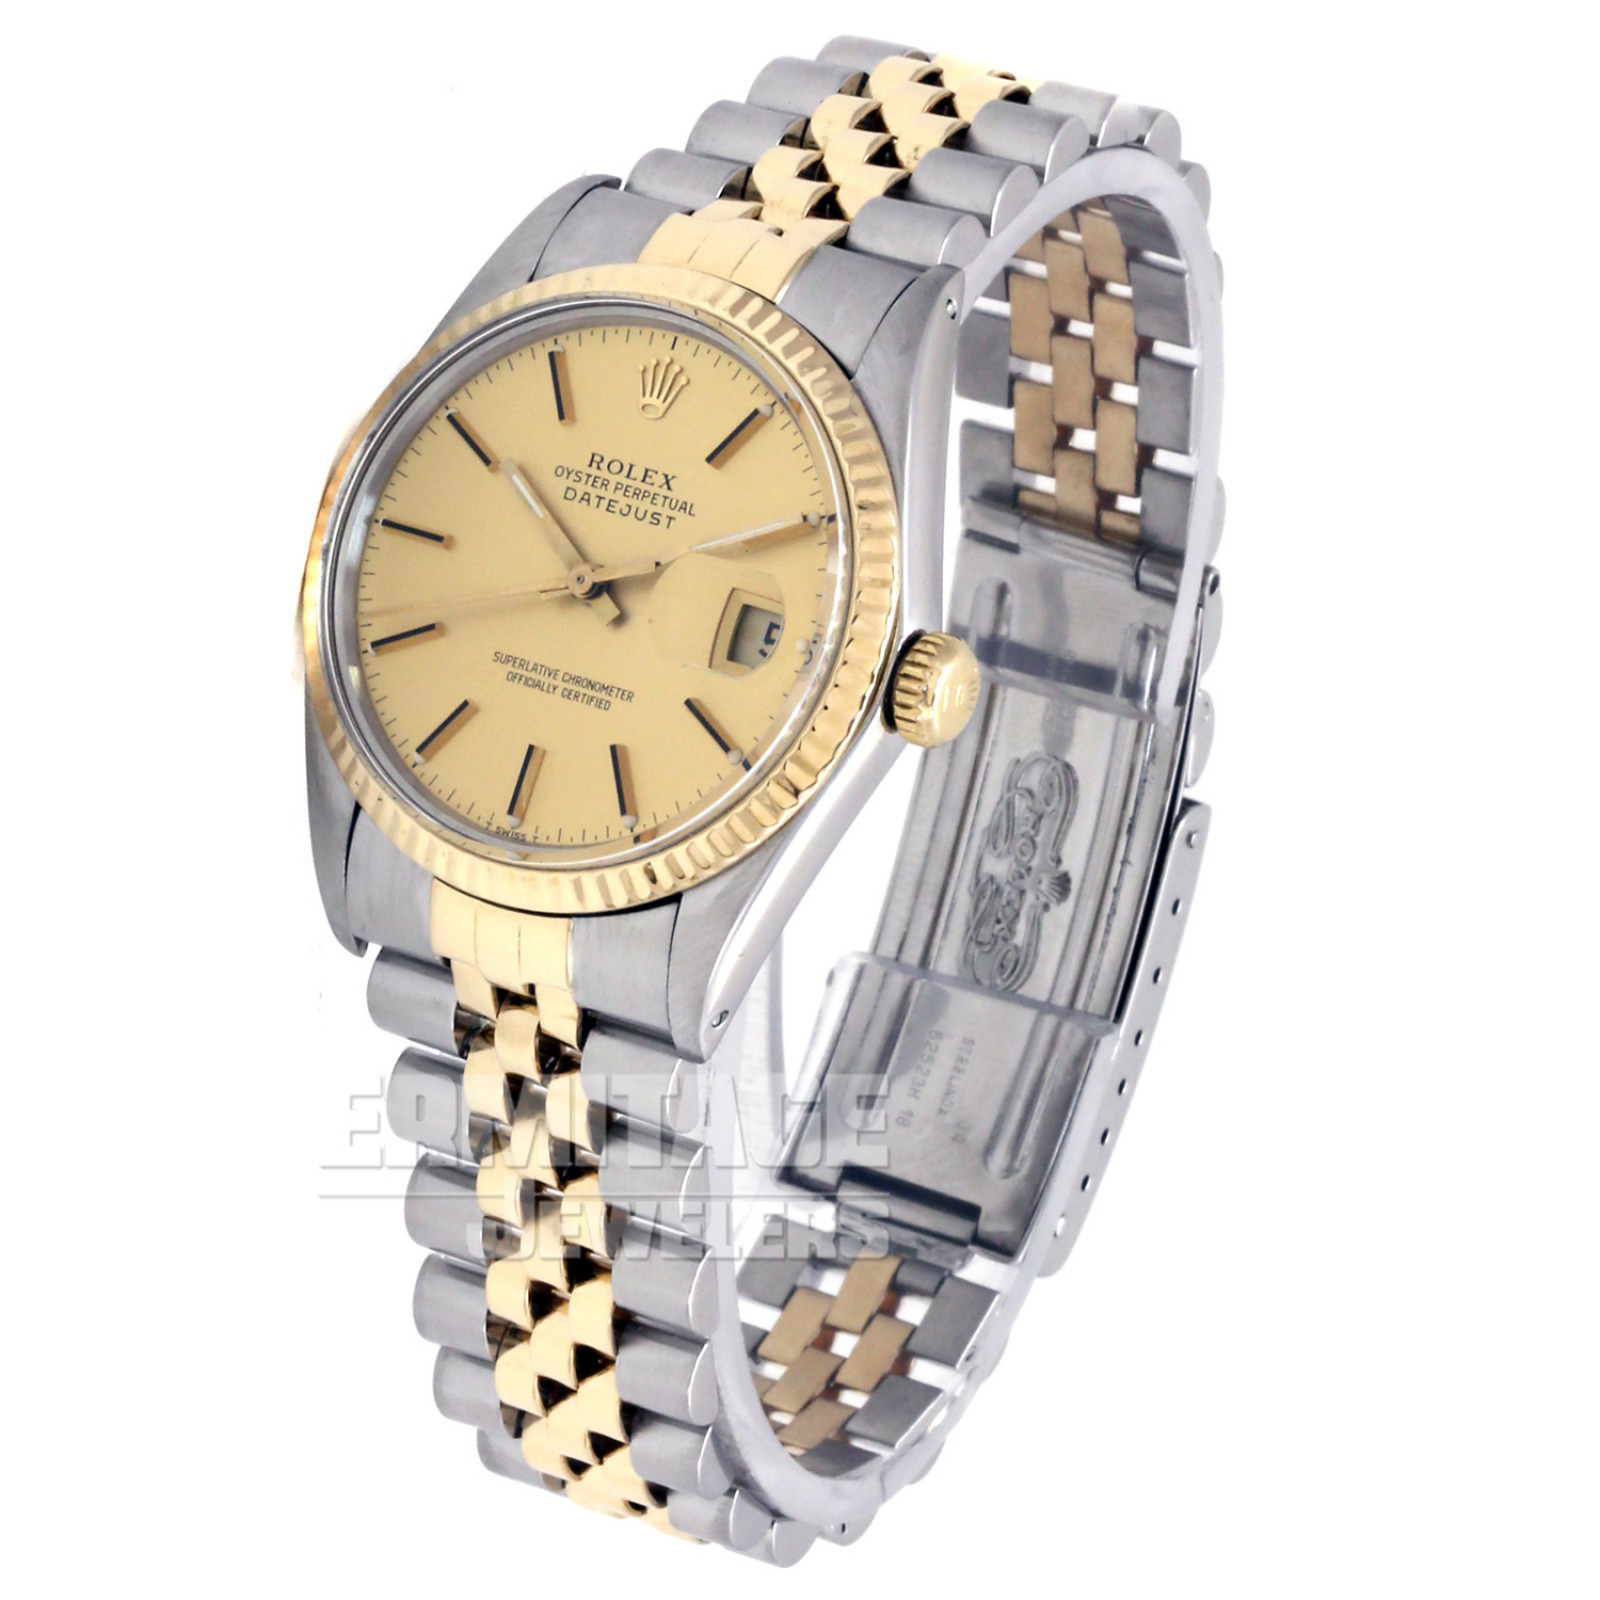 Sell Rolex Datejust 16013 with Champagne Dial